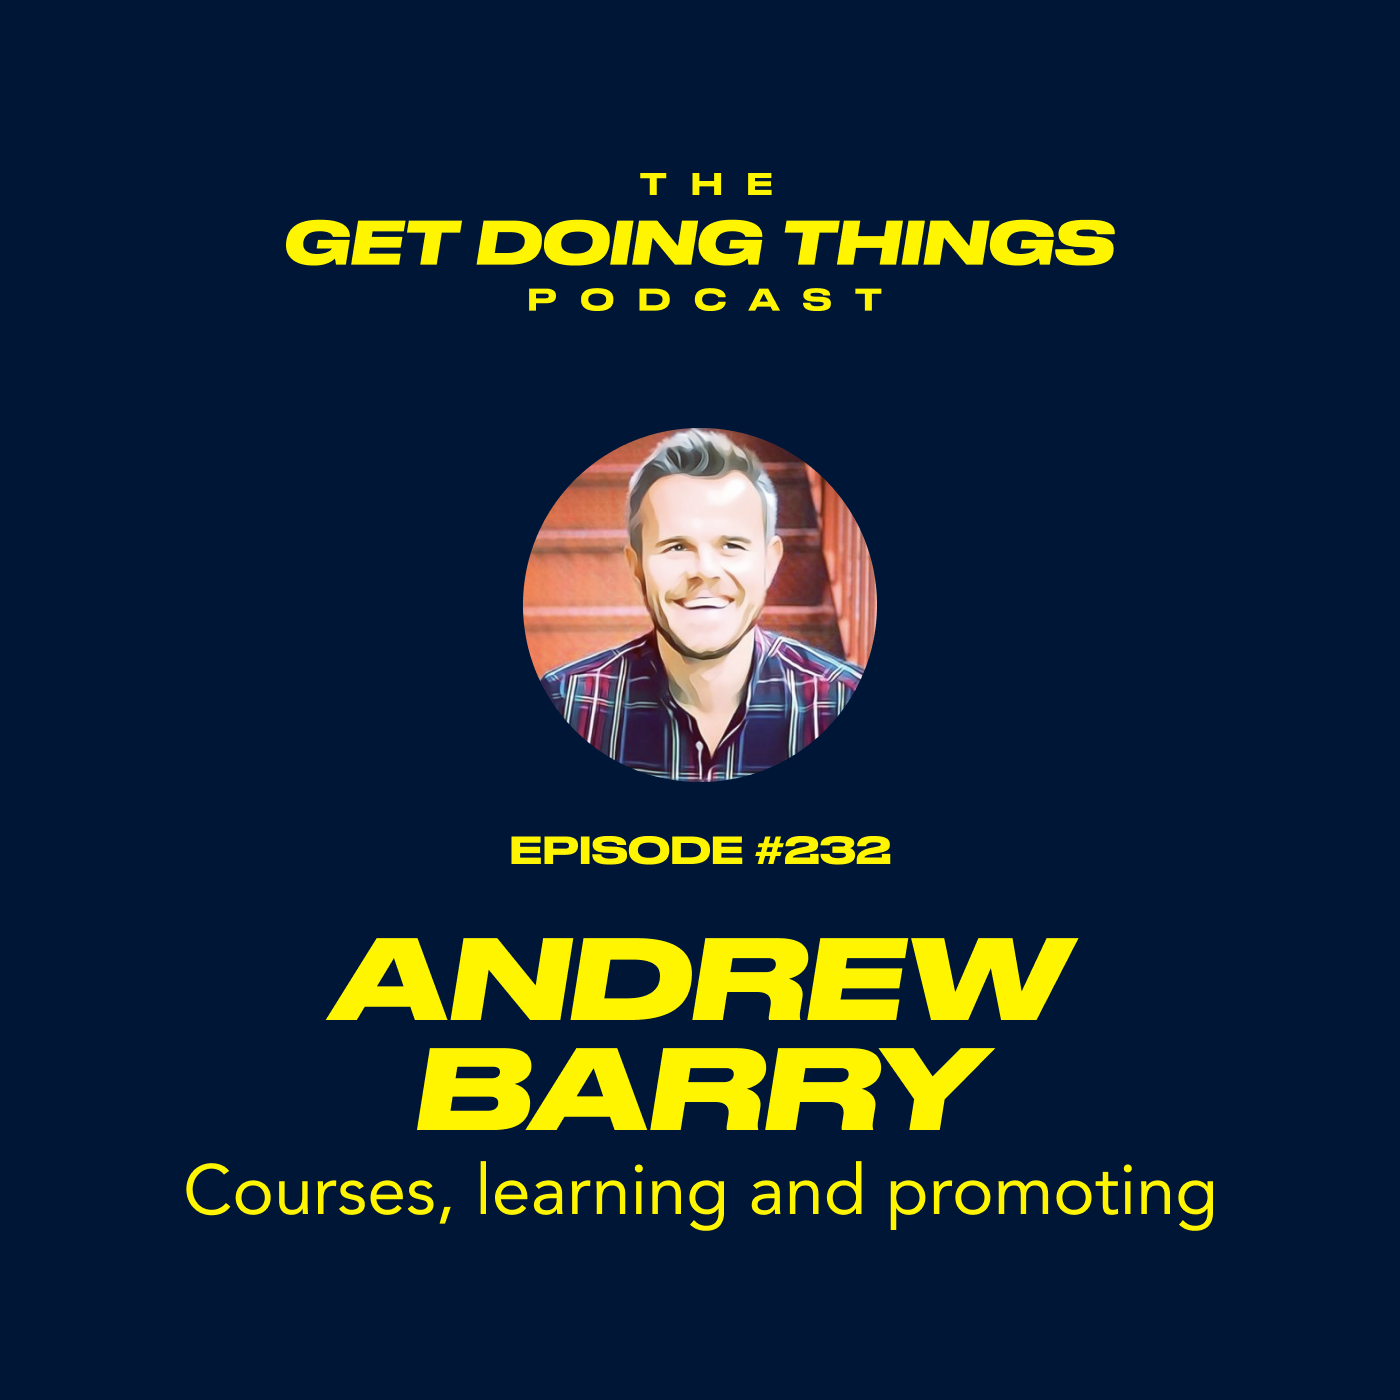 Andrew Barry - Courses, learning and promoting